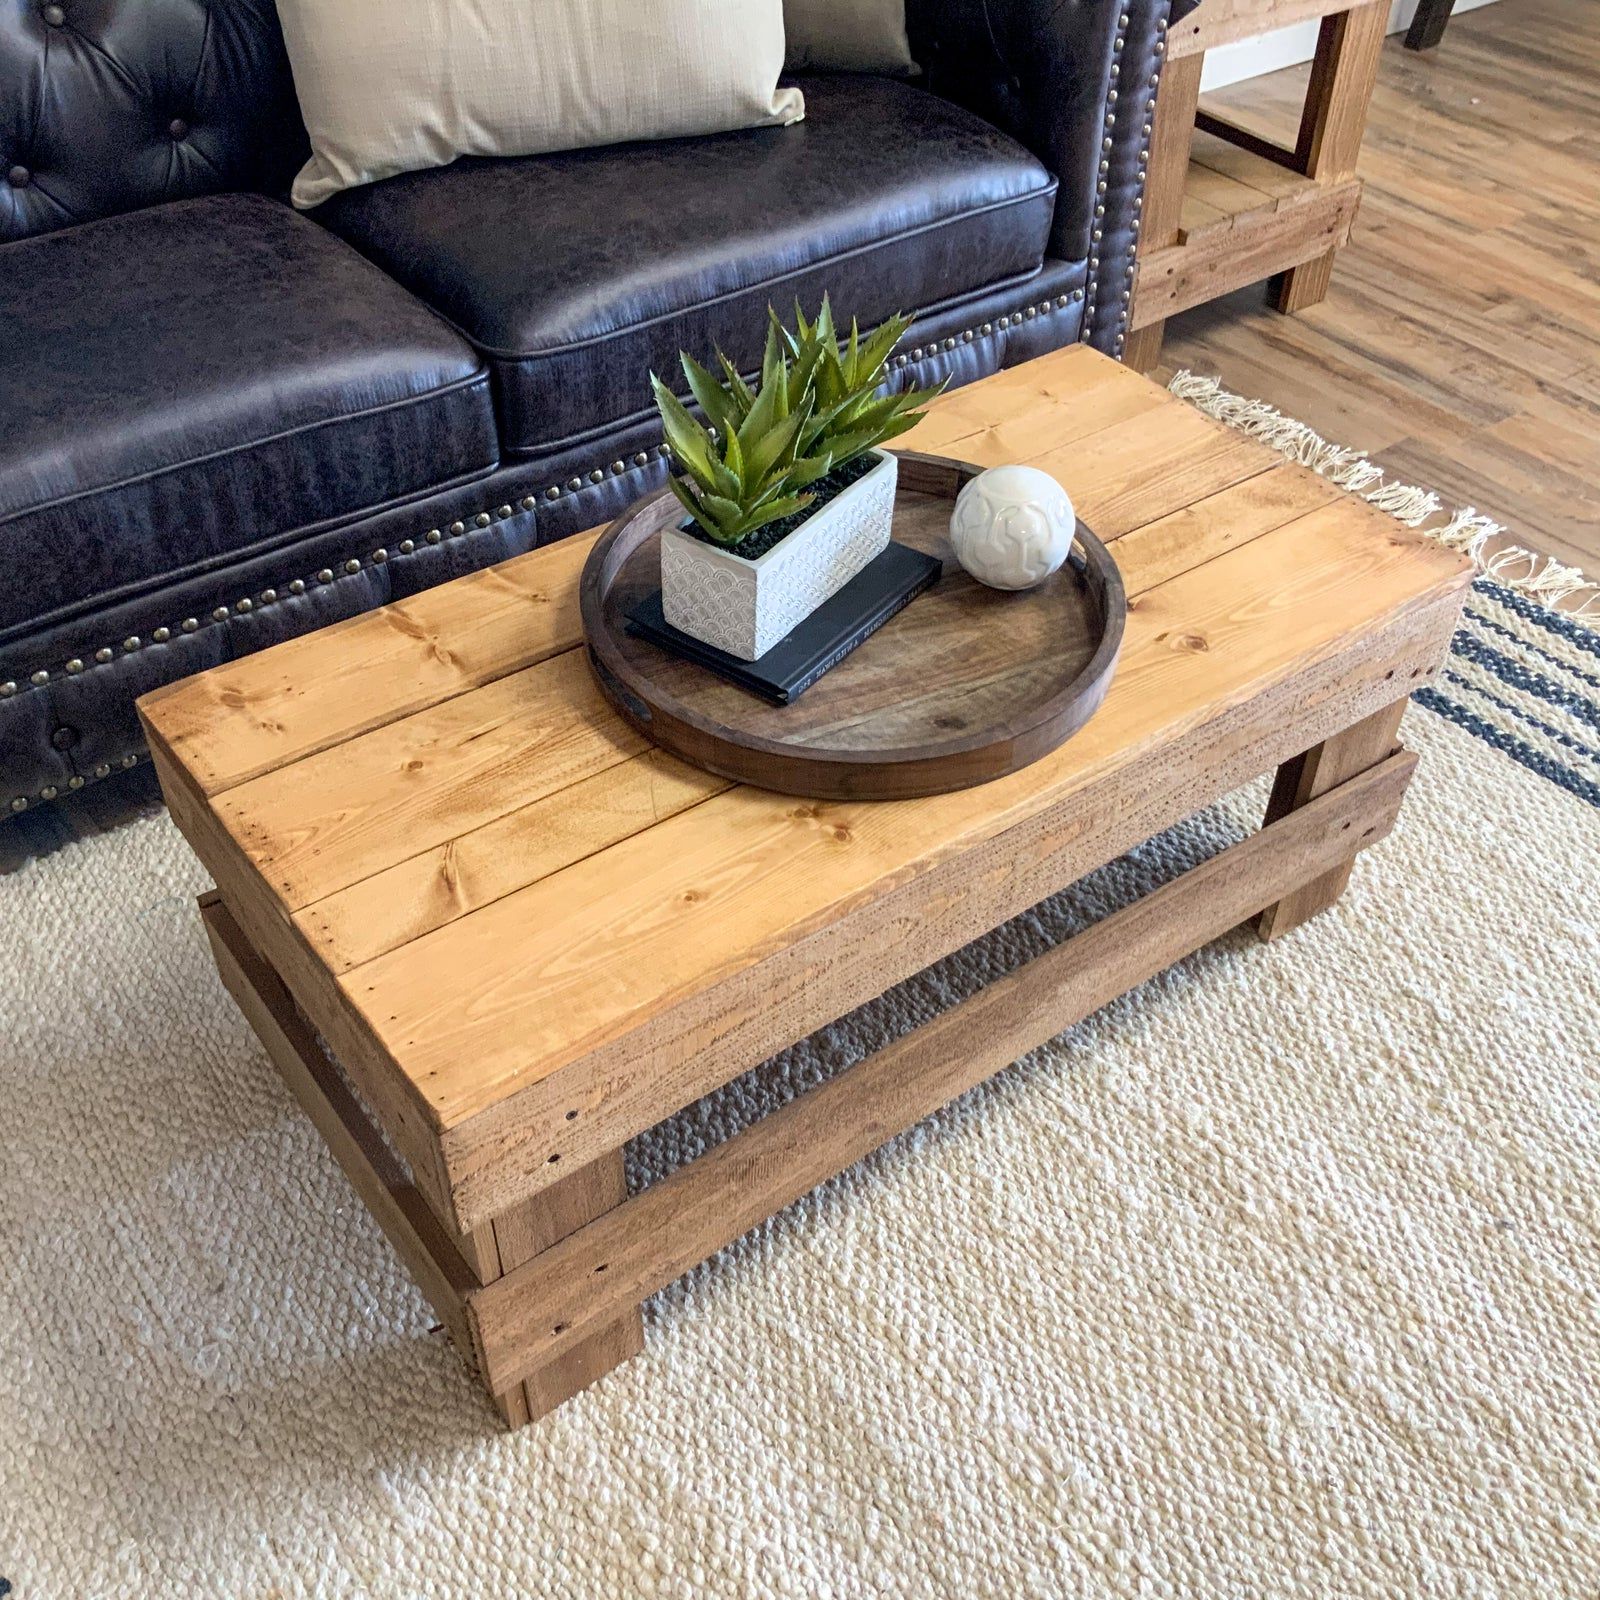 Woven Paths Landmark Pine Solid Wood Farmhouse Coffee Table, Walnut Intended For Woven Paths Coffee Tables (View 6 of 20)